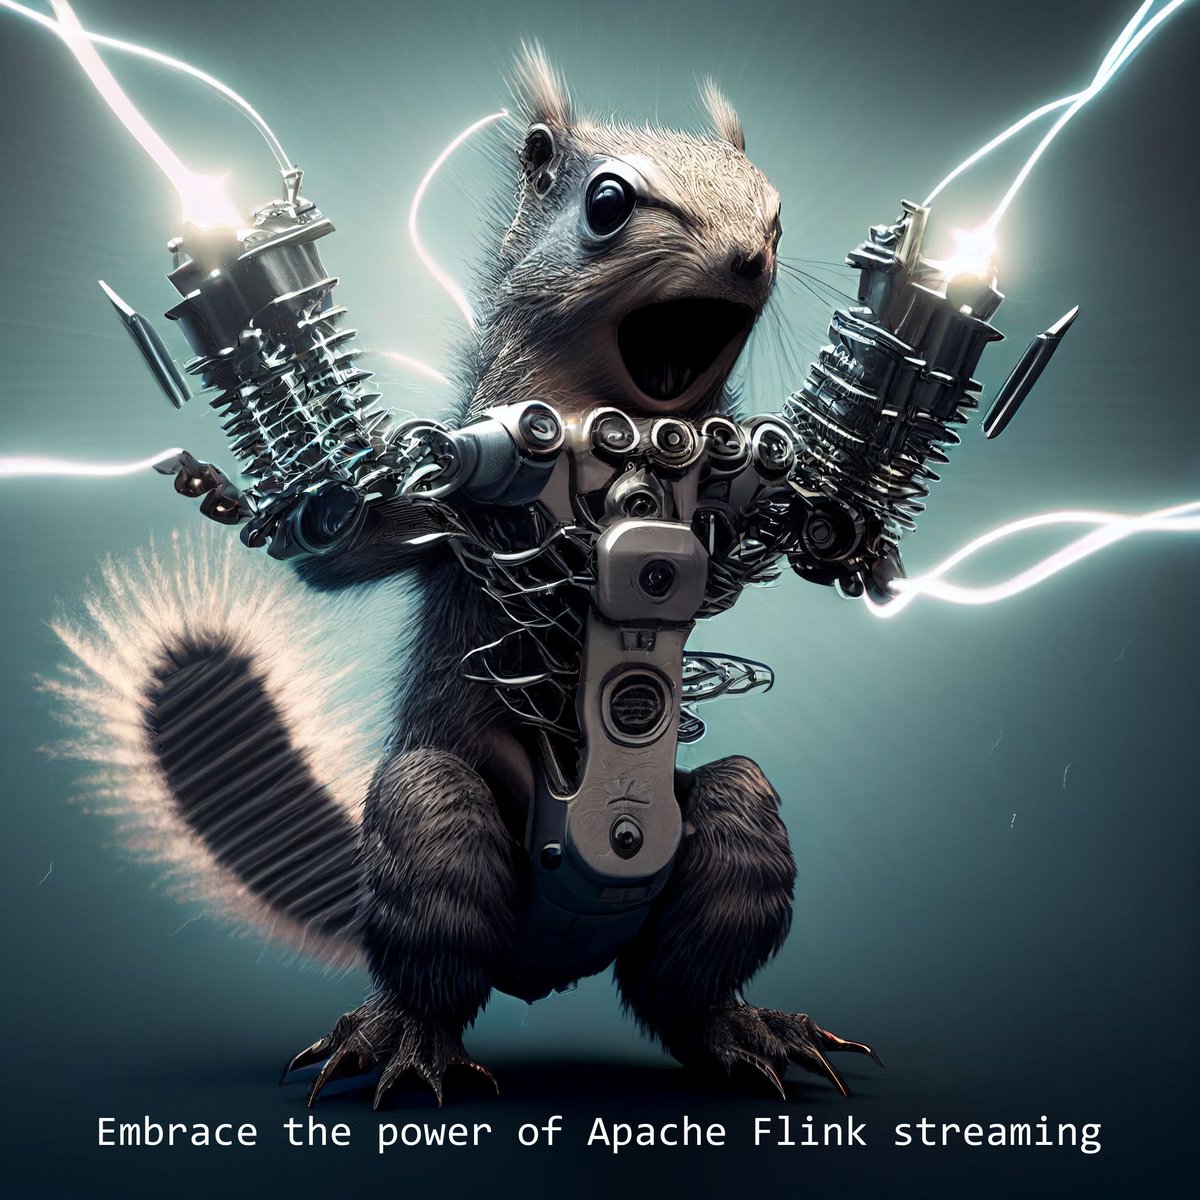 This is my AI rendition of a badass Apache Flink streaming squirrel.